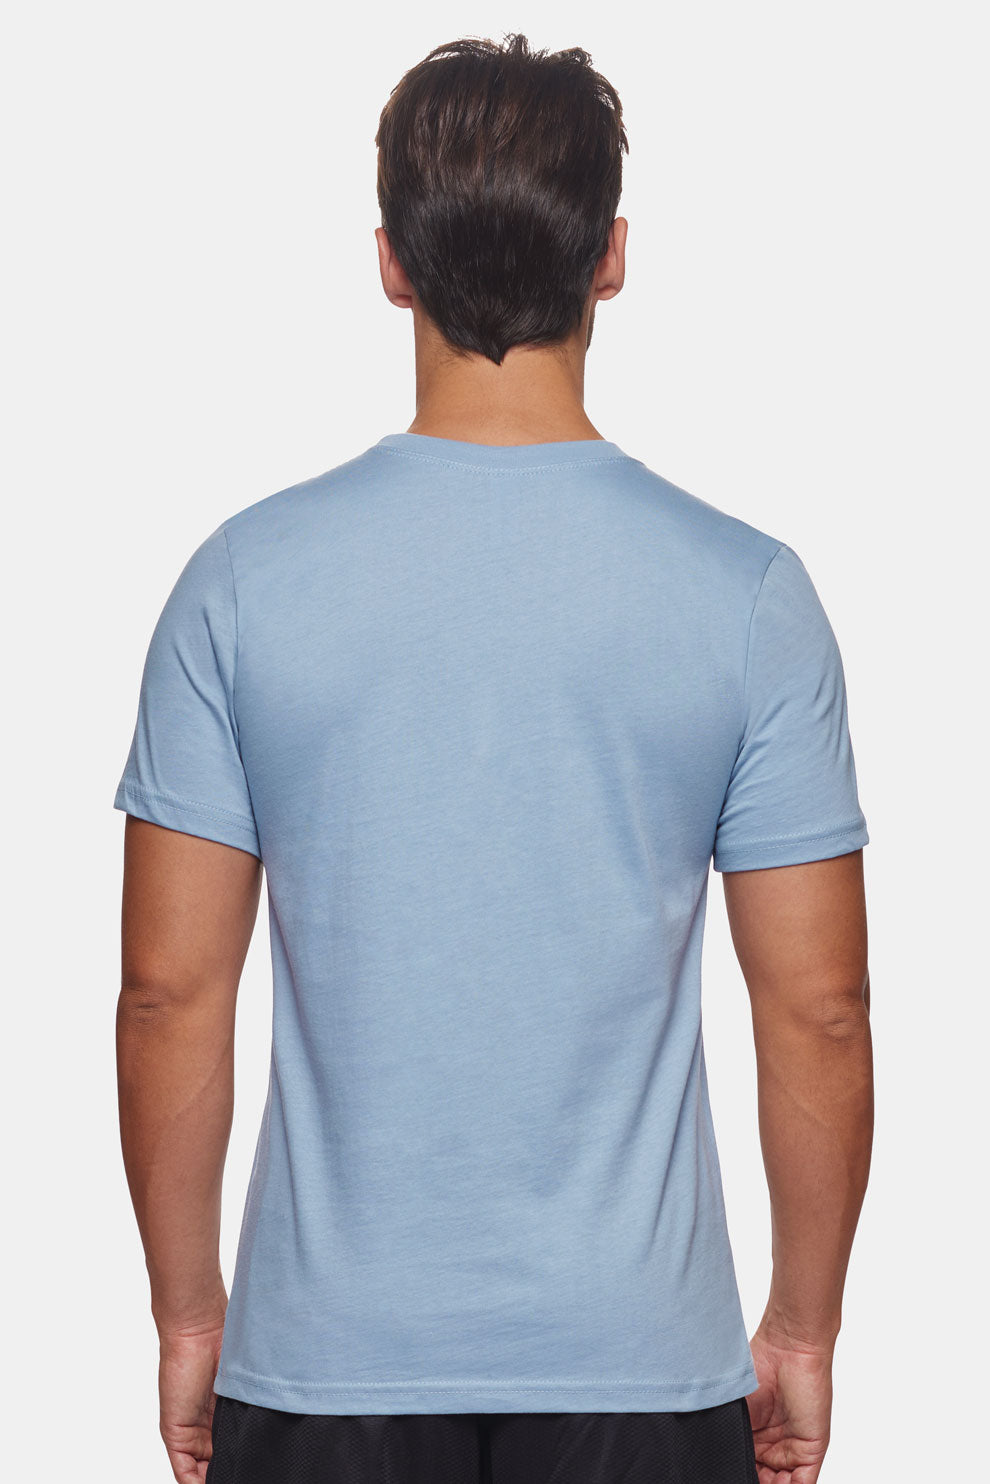 Expert Brand Apparel Unisex Organic Cotton Tee Made in USA in canyon blue image 3#color_canyon-blue